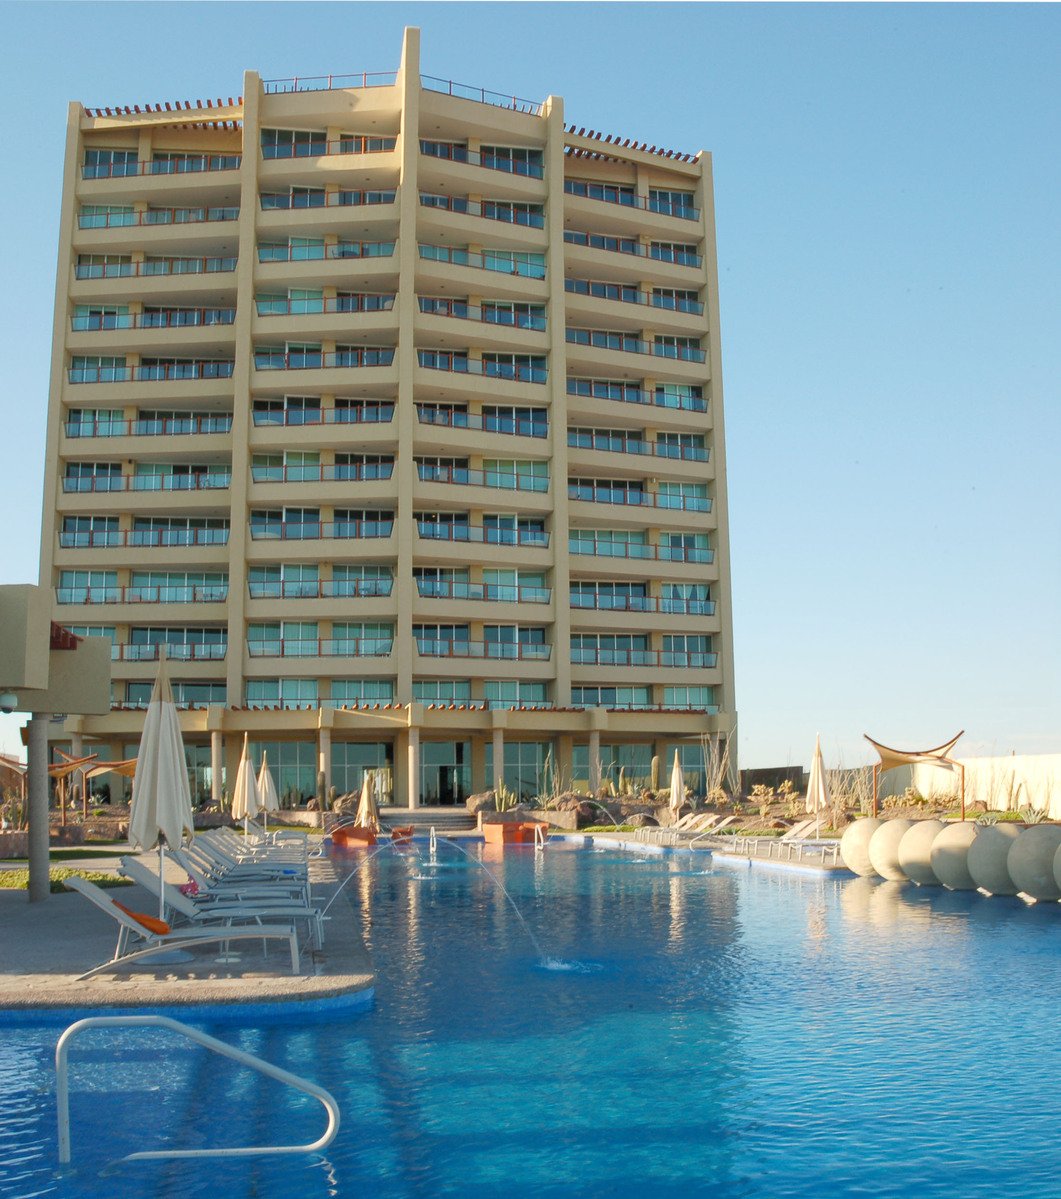 an outdoor swimming pool with chaise lounge chairs and swimming pool in front of large multi - story building